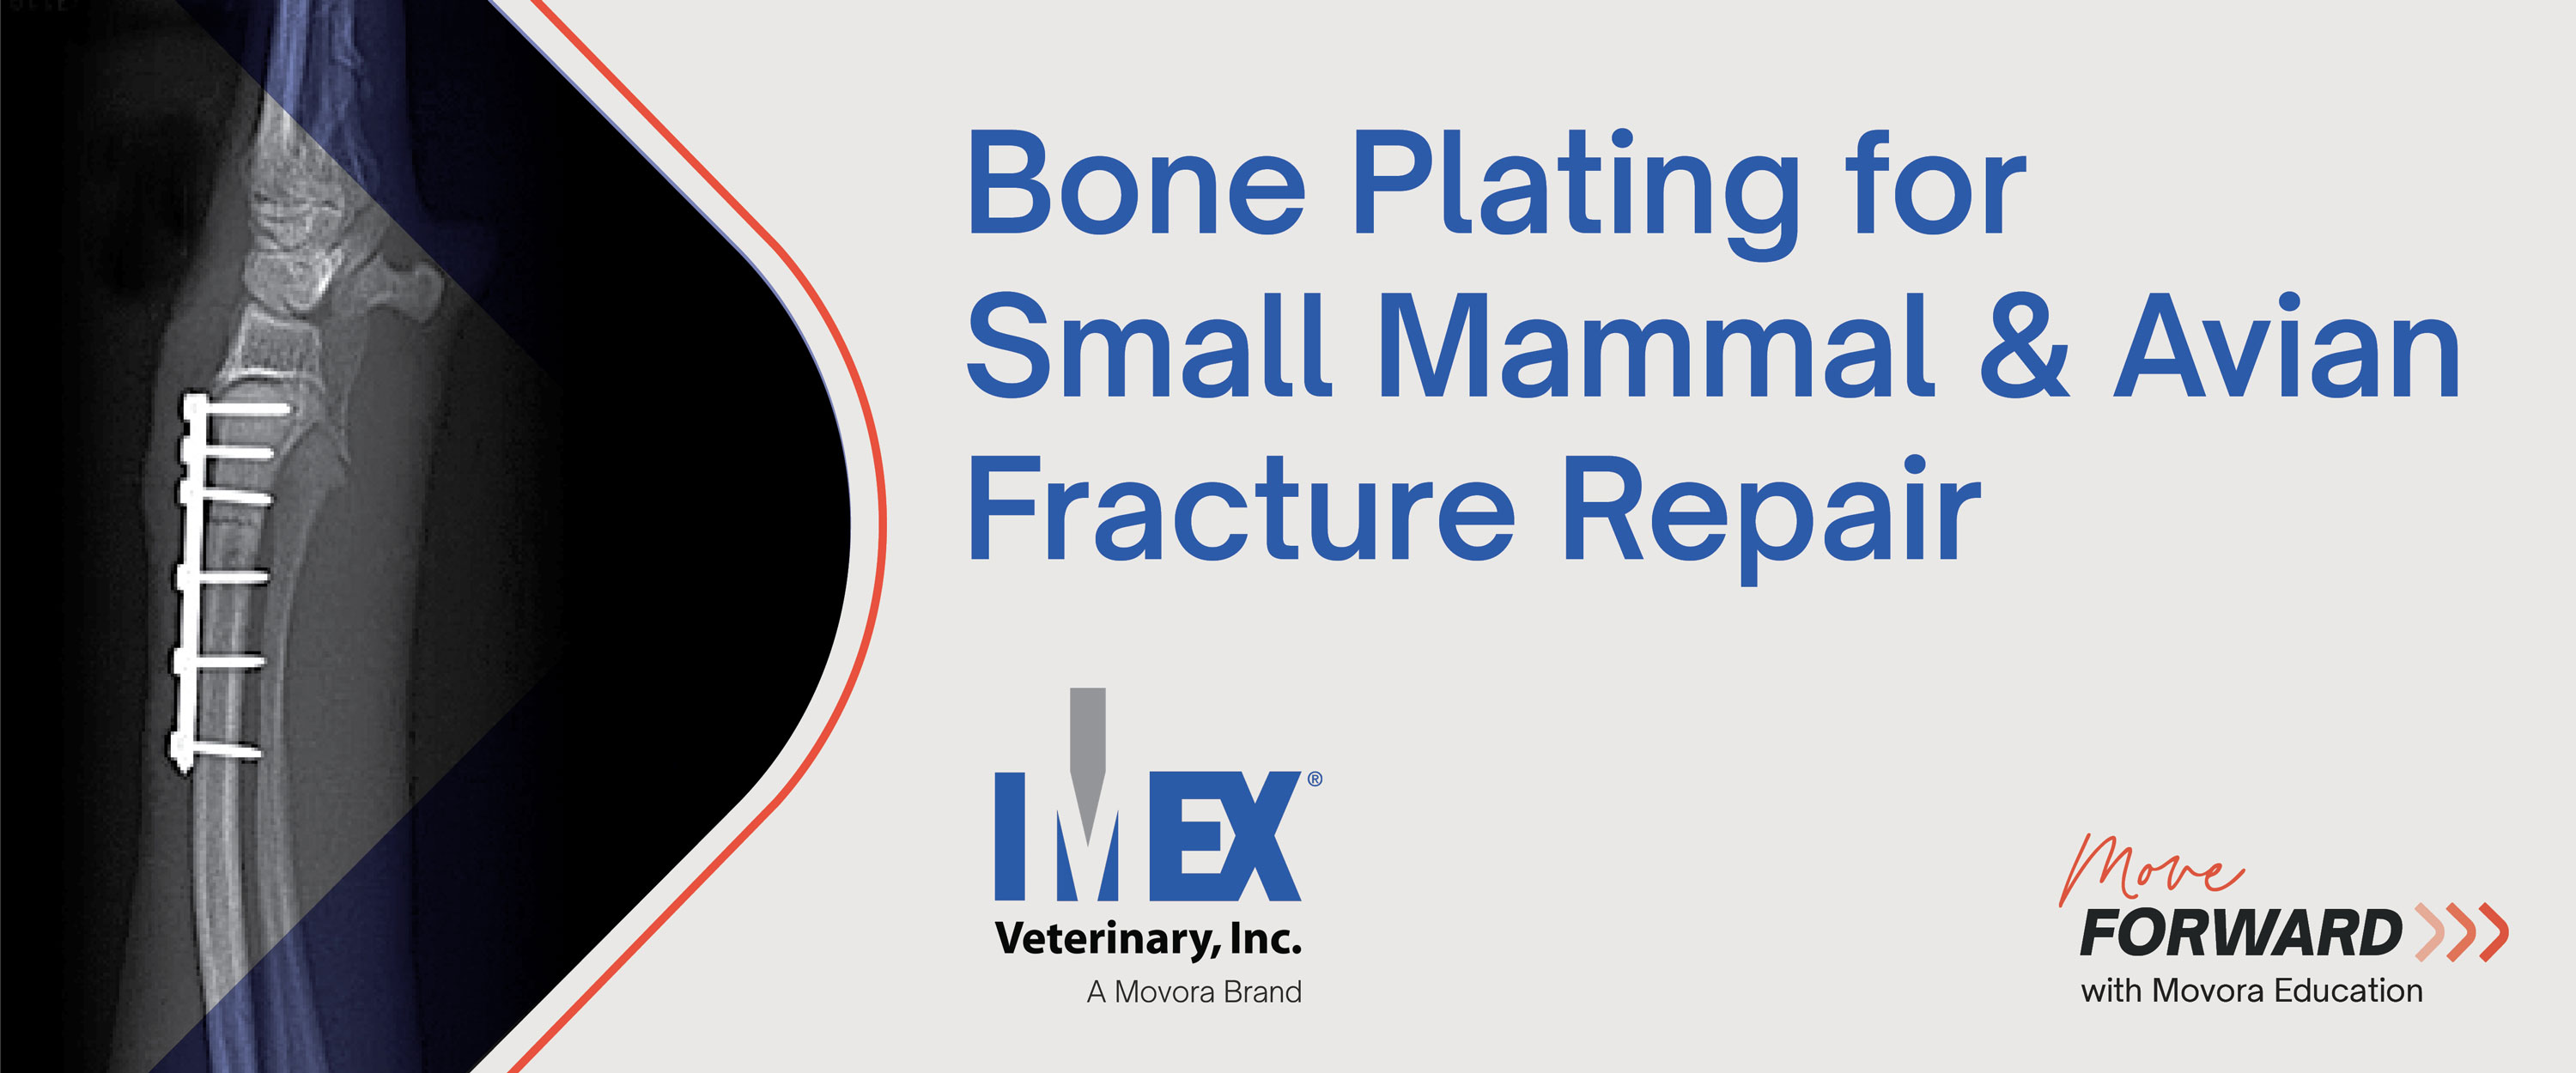 2024 IMEX Move Forward LMS Banner - Bone Plating for Small Mammal and Avian Fracture Repair Workshop